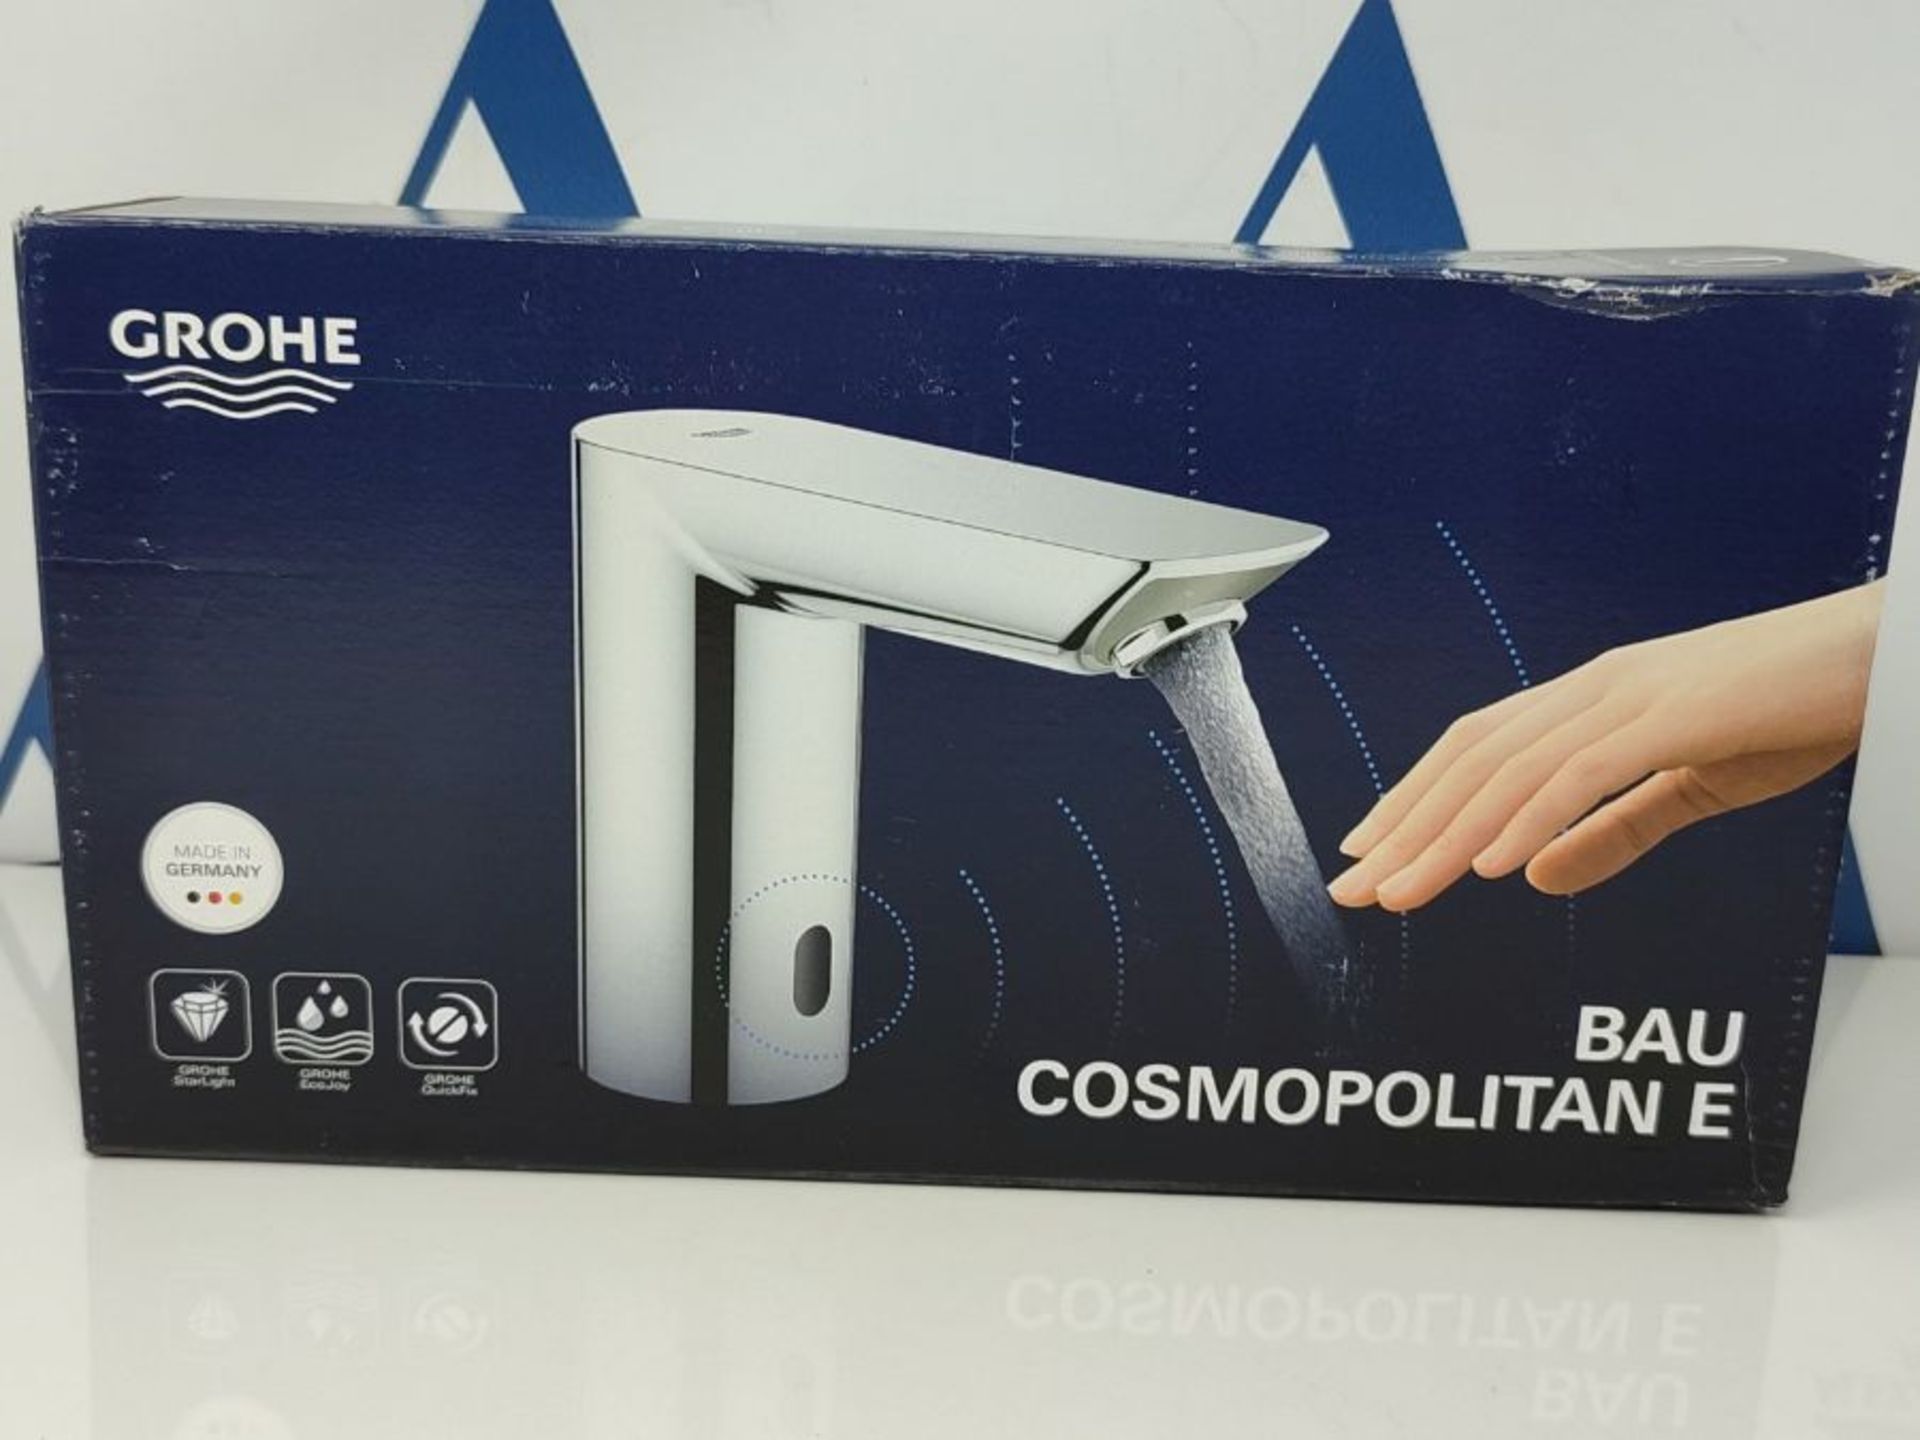 RRP £230.00 GROHE Bau Cosmopolitan E - Infrared Sensor Touchless Basin Mixer Tap with Mixing Devic - Image 2 of 6